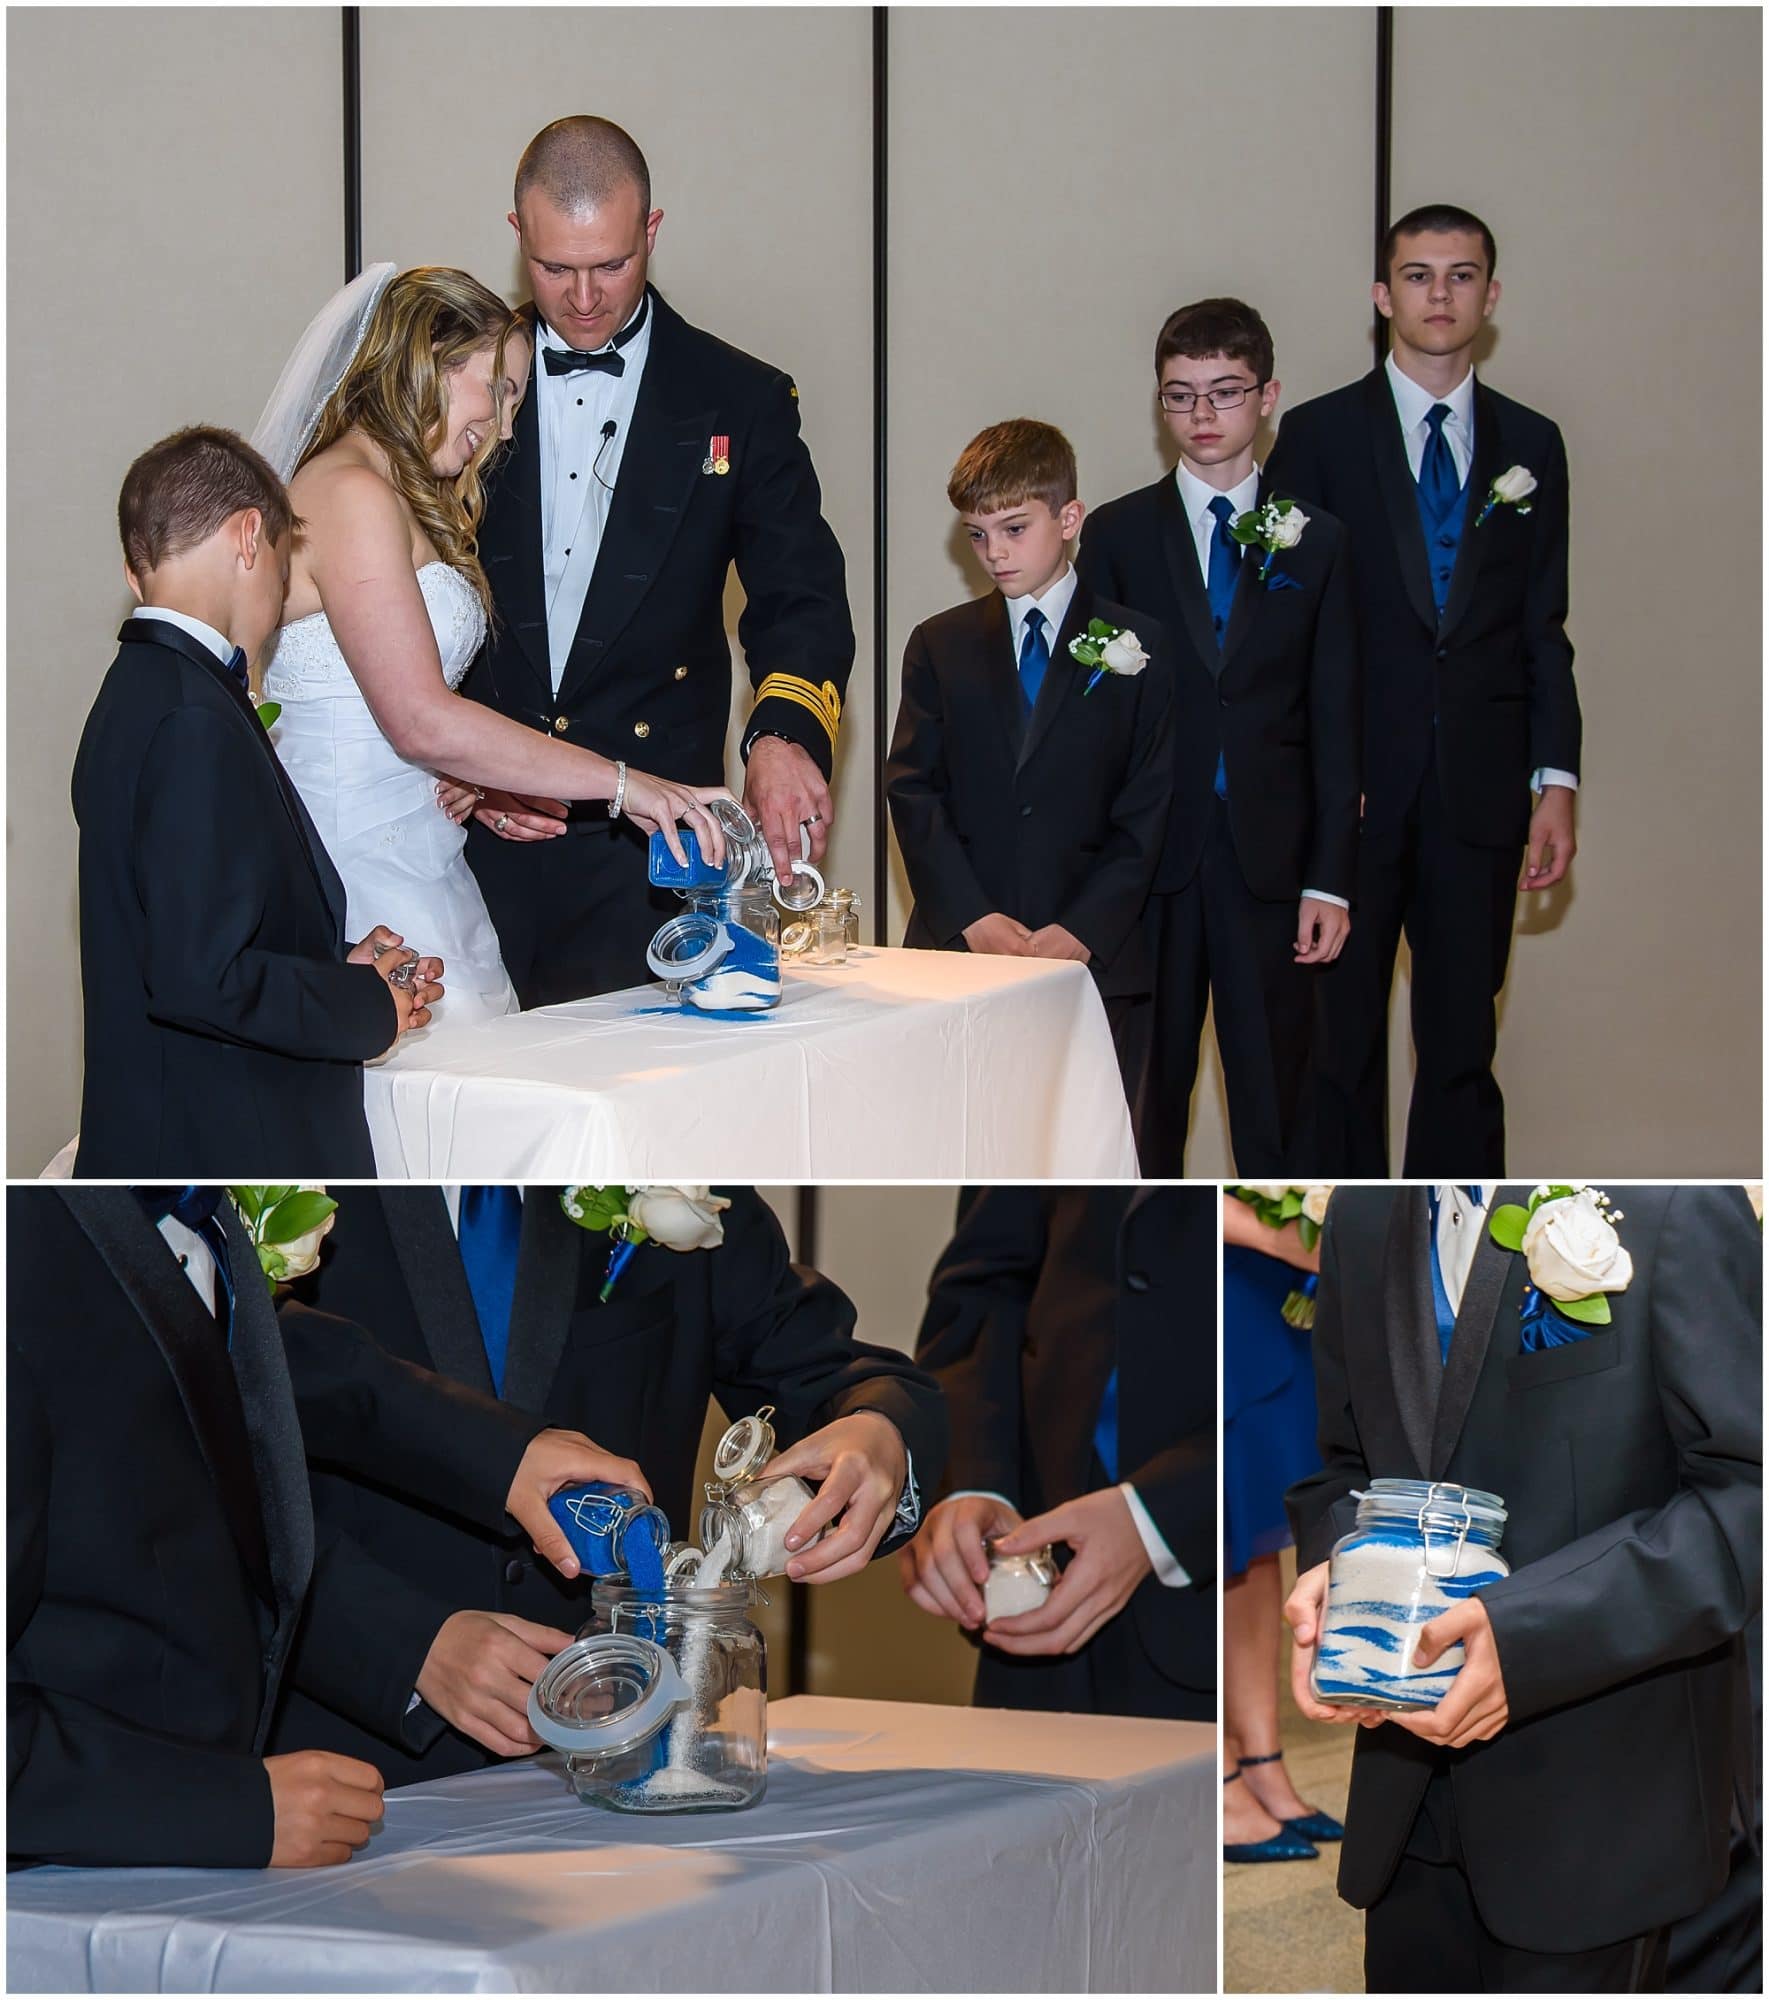 The bride and groom with their children perform a wedding sand ceremony at their Juno Tower wedding.